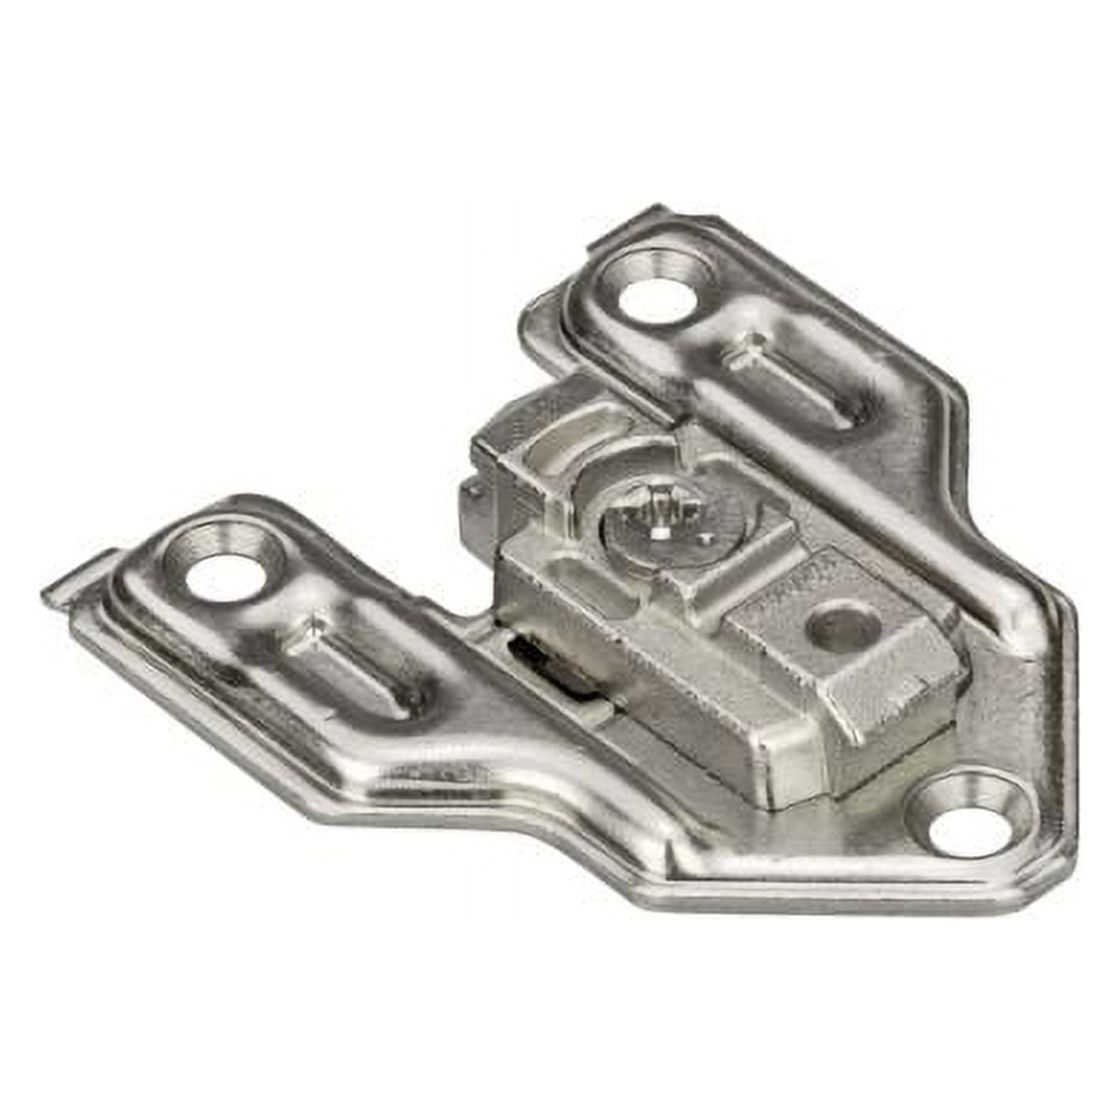 Blum 50-Pack Cam Adjustable Clip Face Frame Screw-on 3mm Mounting Plate, Nickel Plated - image 1 of 3